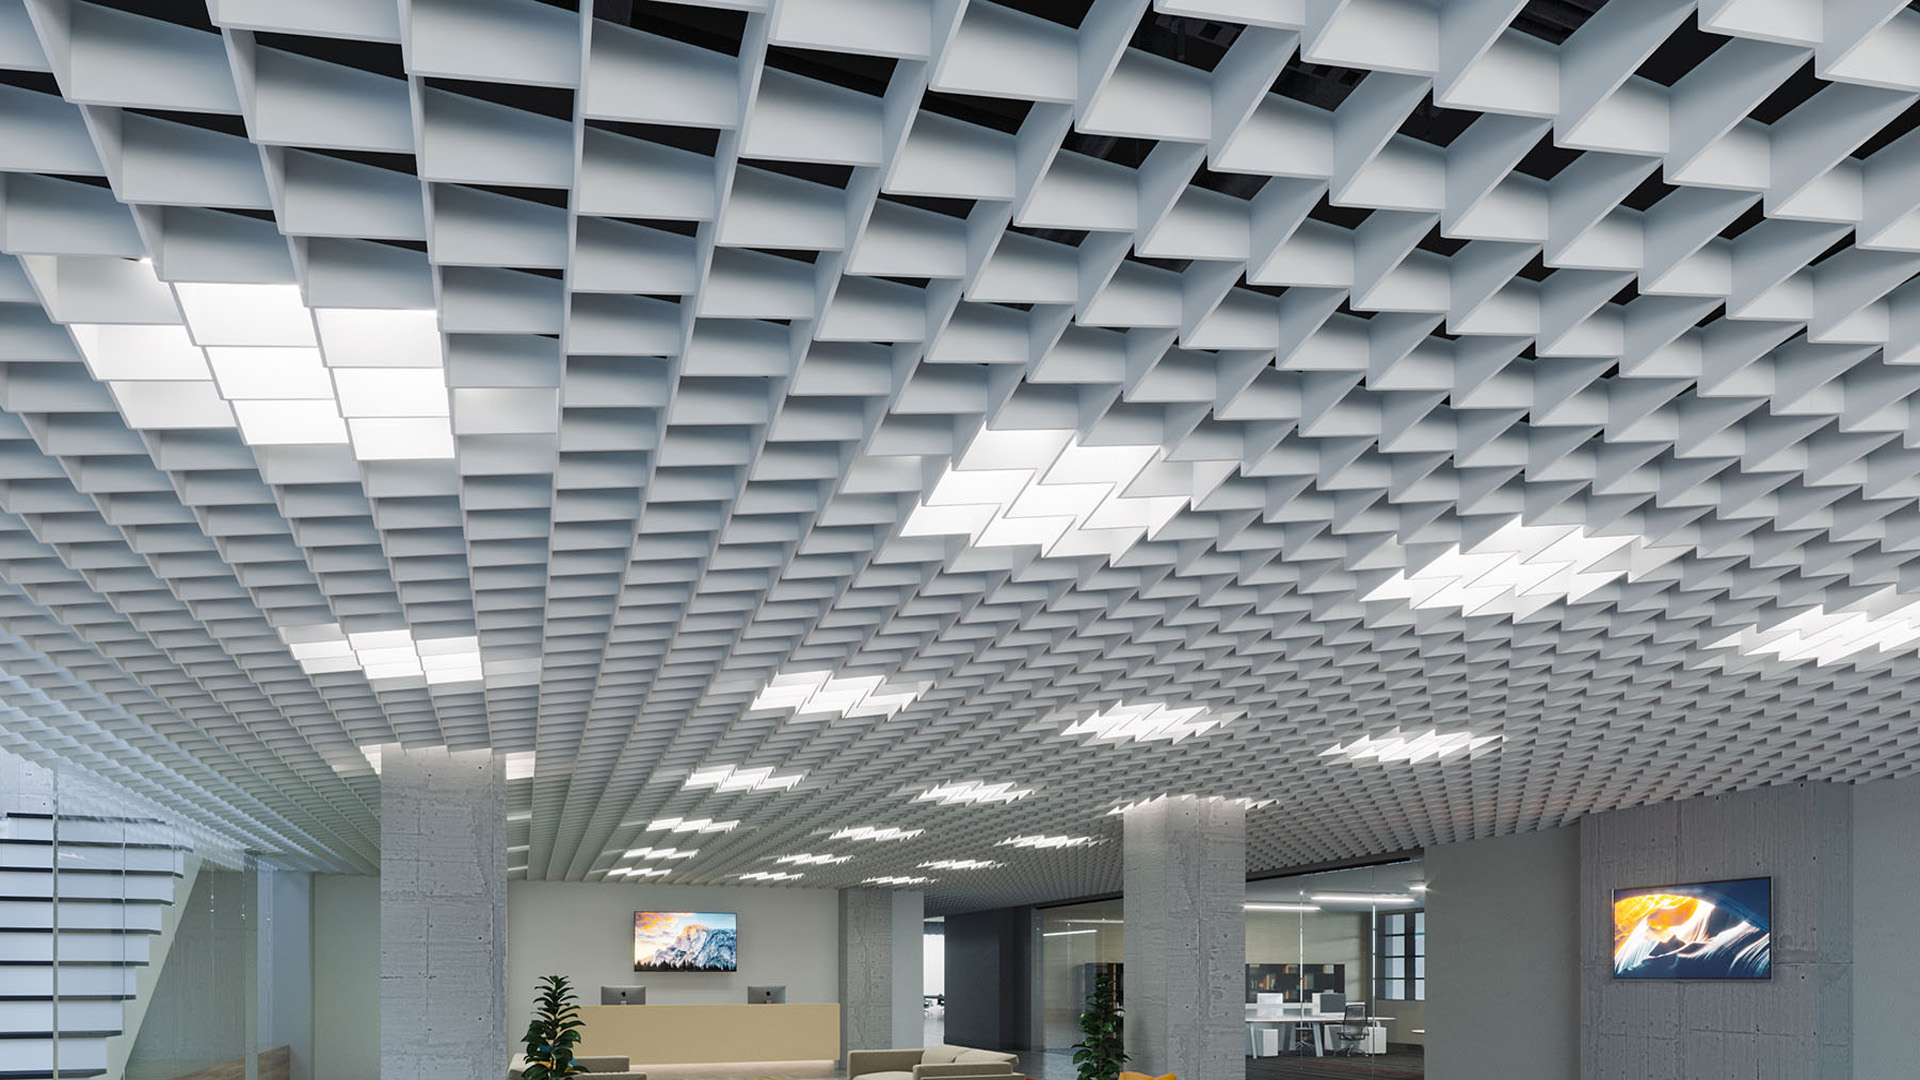 Aluminum Grille Ceiling Project for Office in Saudi Arabia